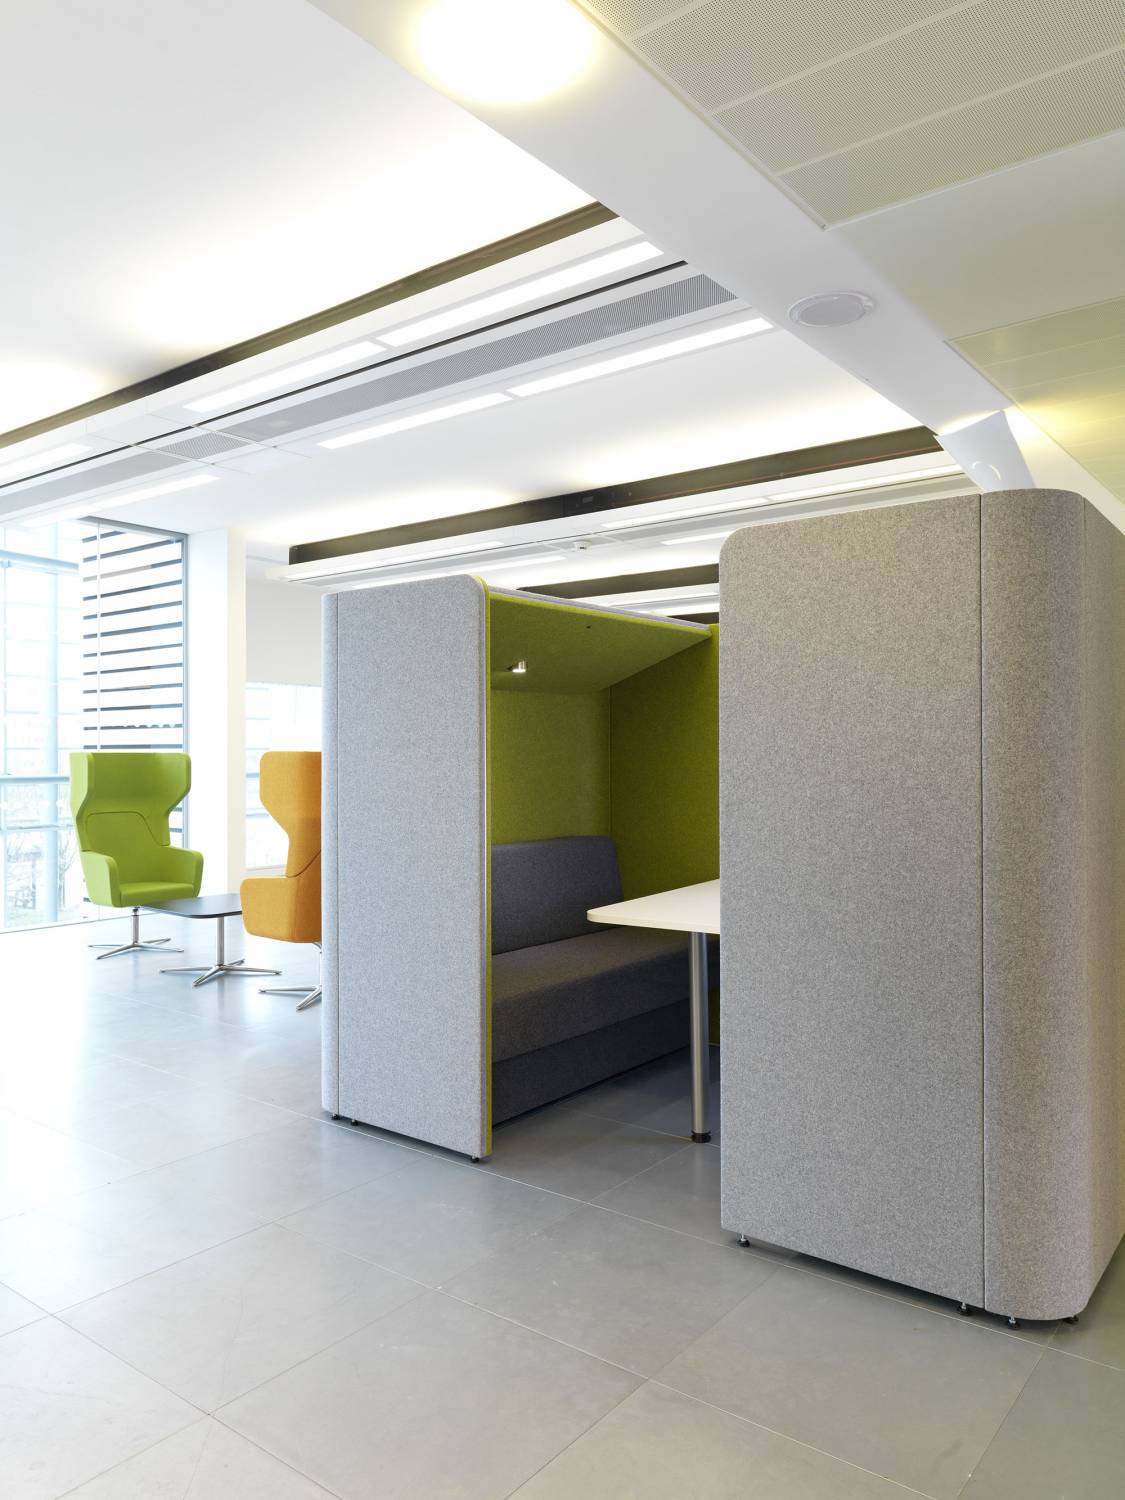 OCEE_FOUR - Work _ Study Booths - Den - Lifestyle Image 3